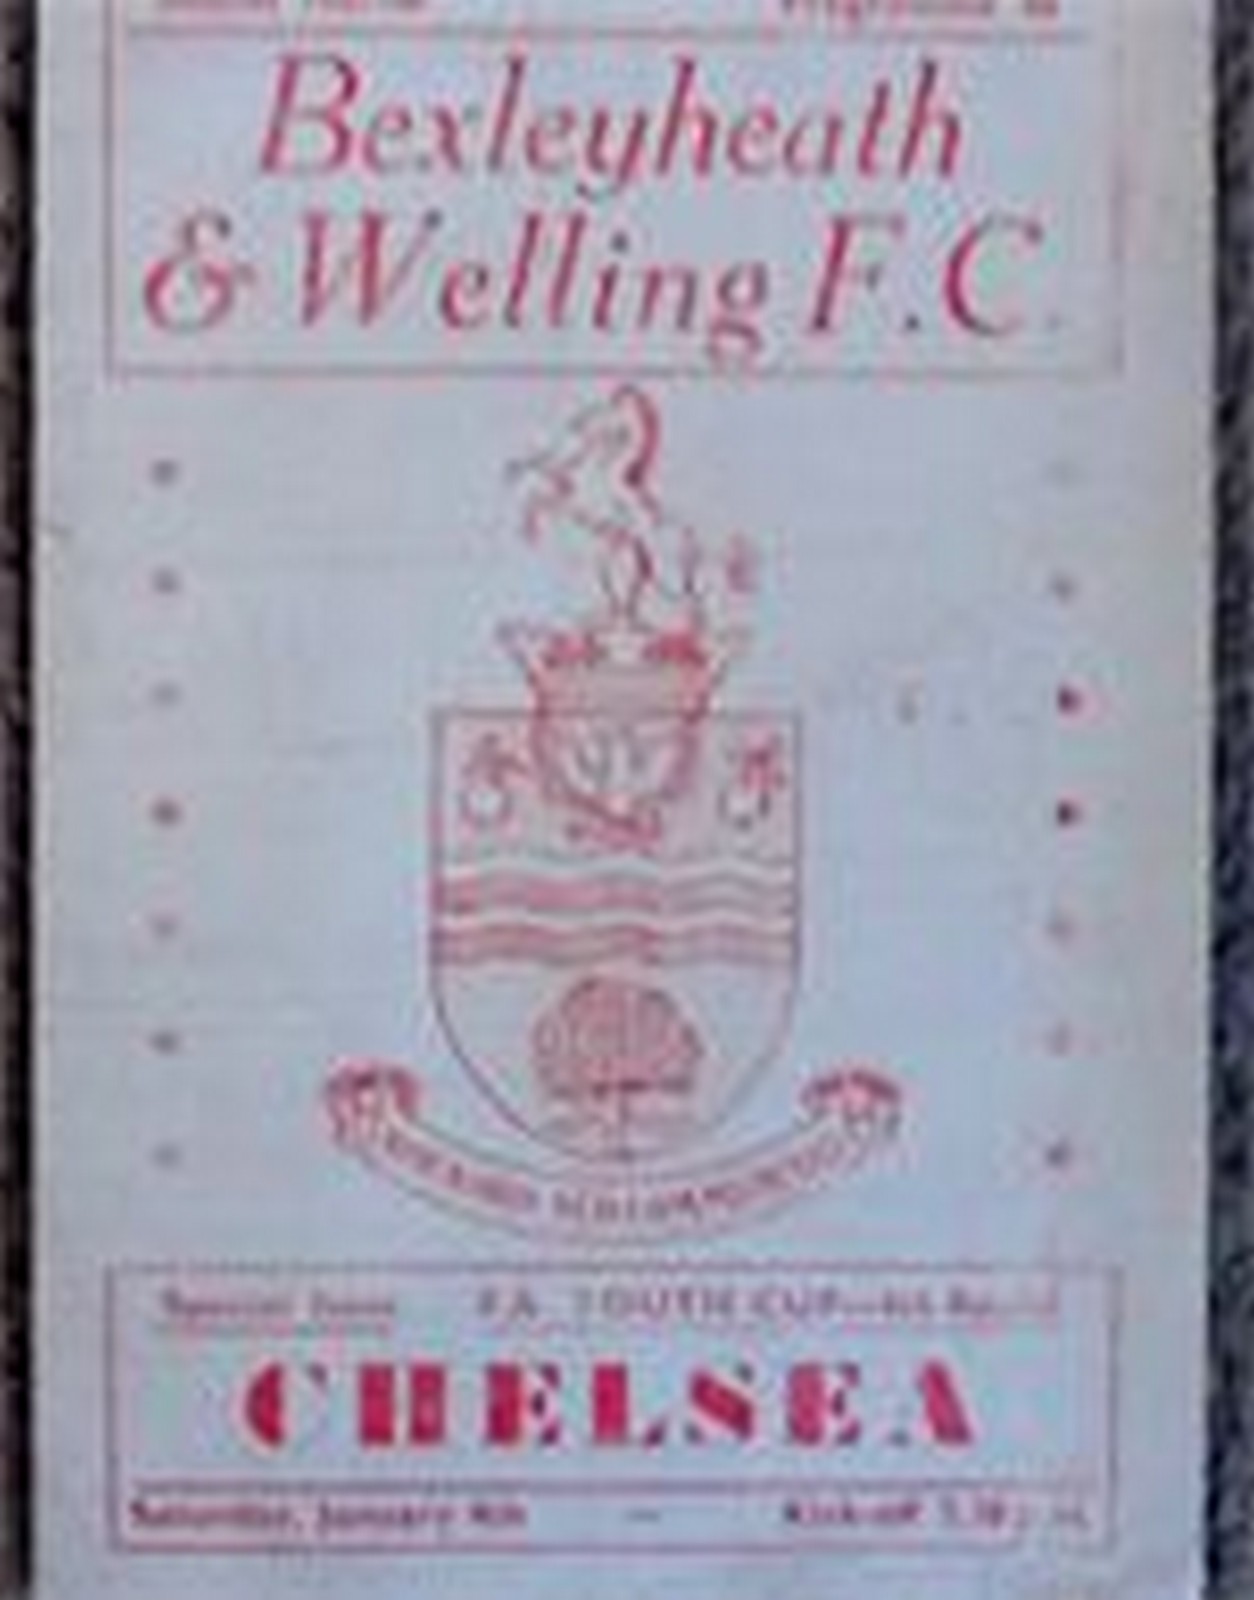 BEXLEYHEATH V CHELSEA FA YOUTH CUP 1957/8 Rare programme for this FA youth cup game Good